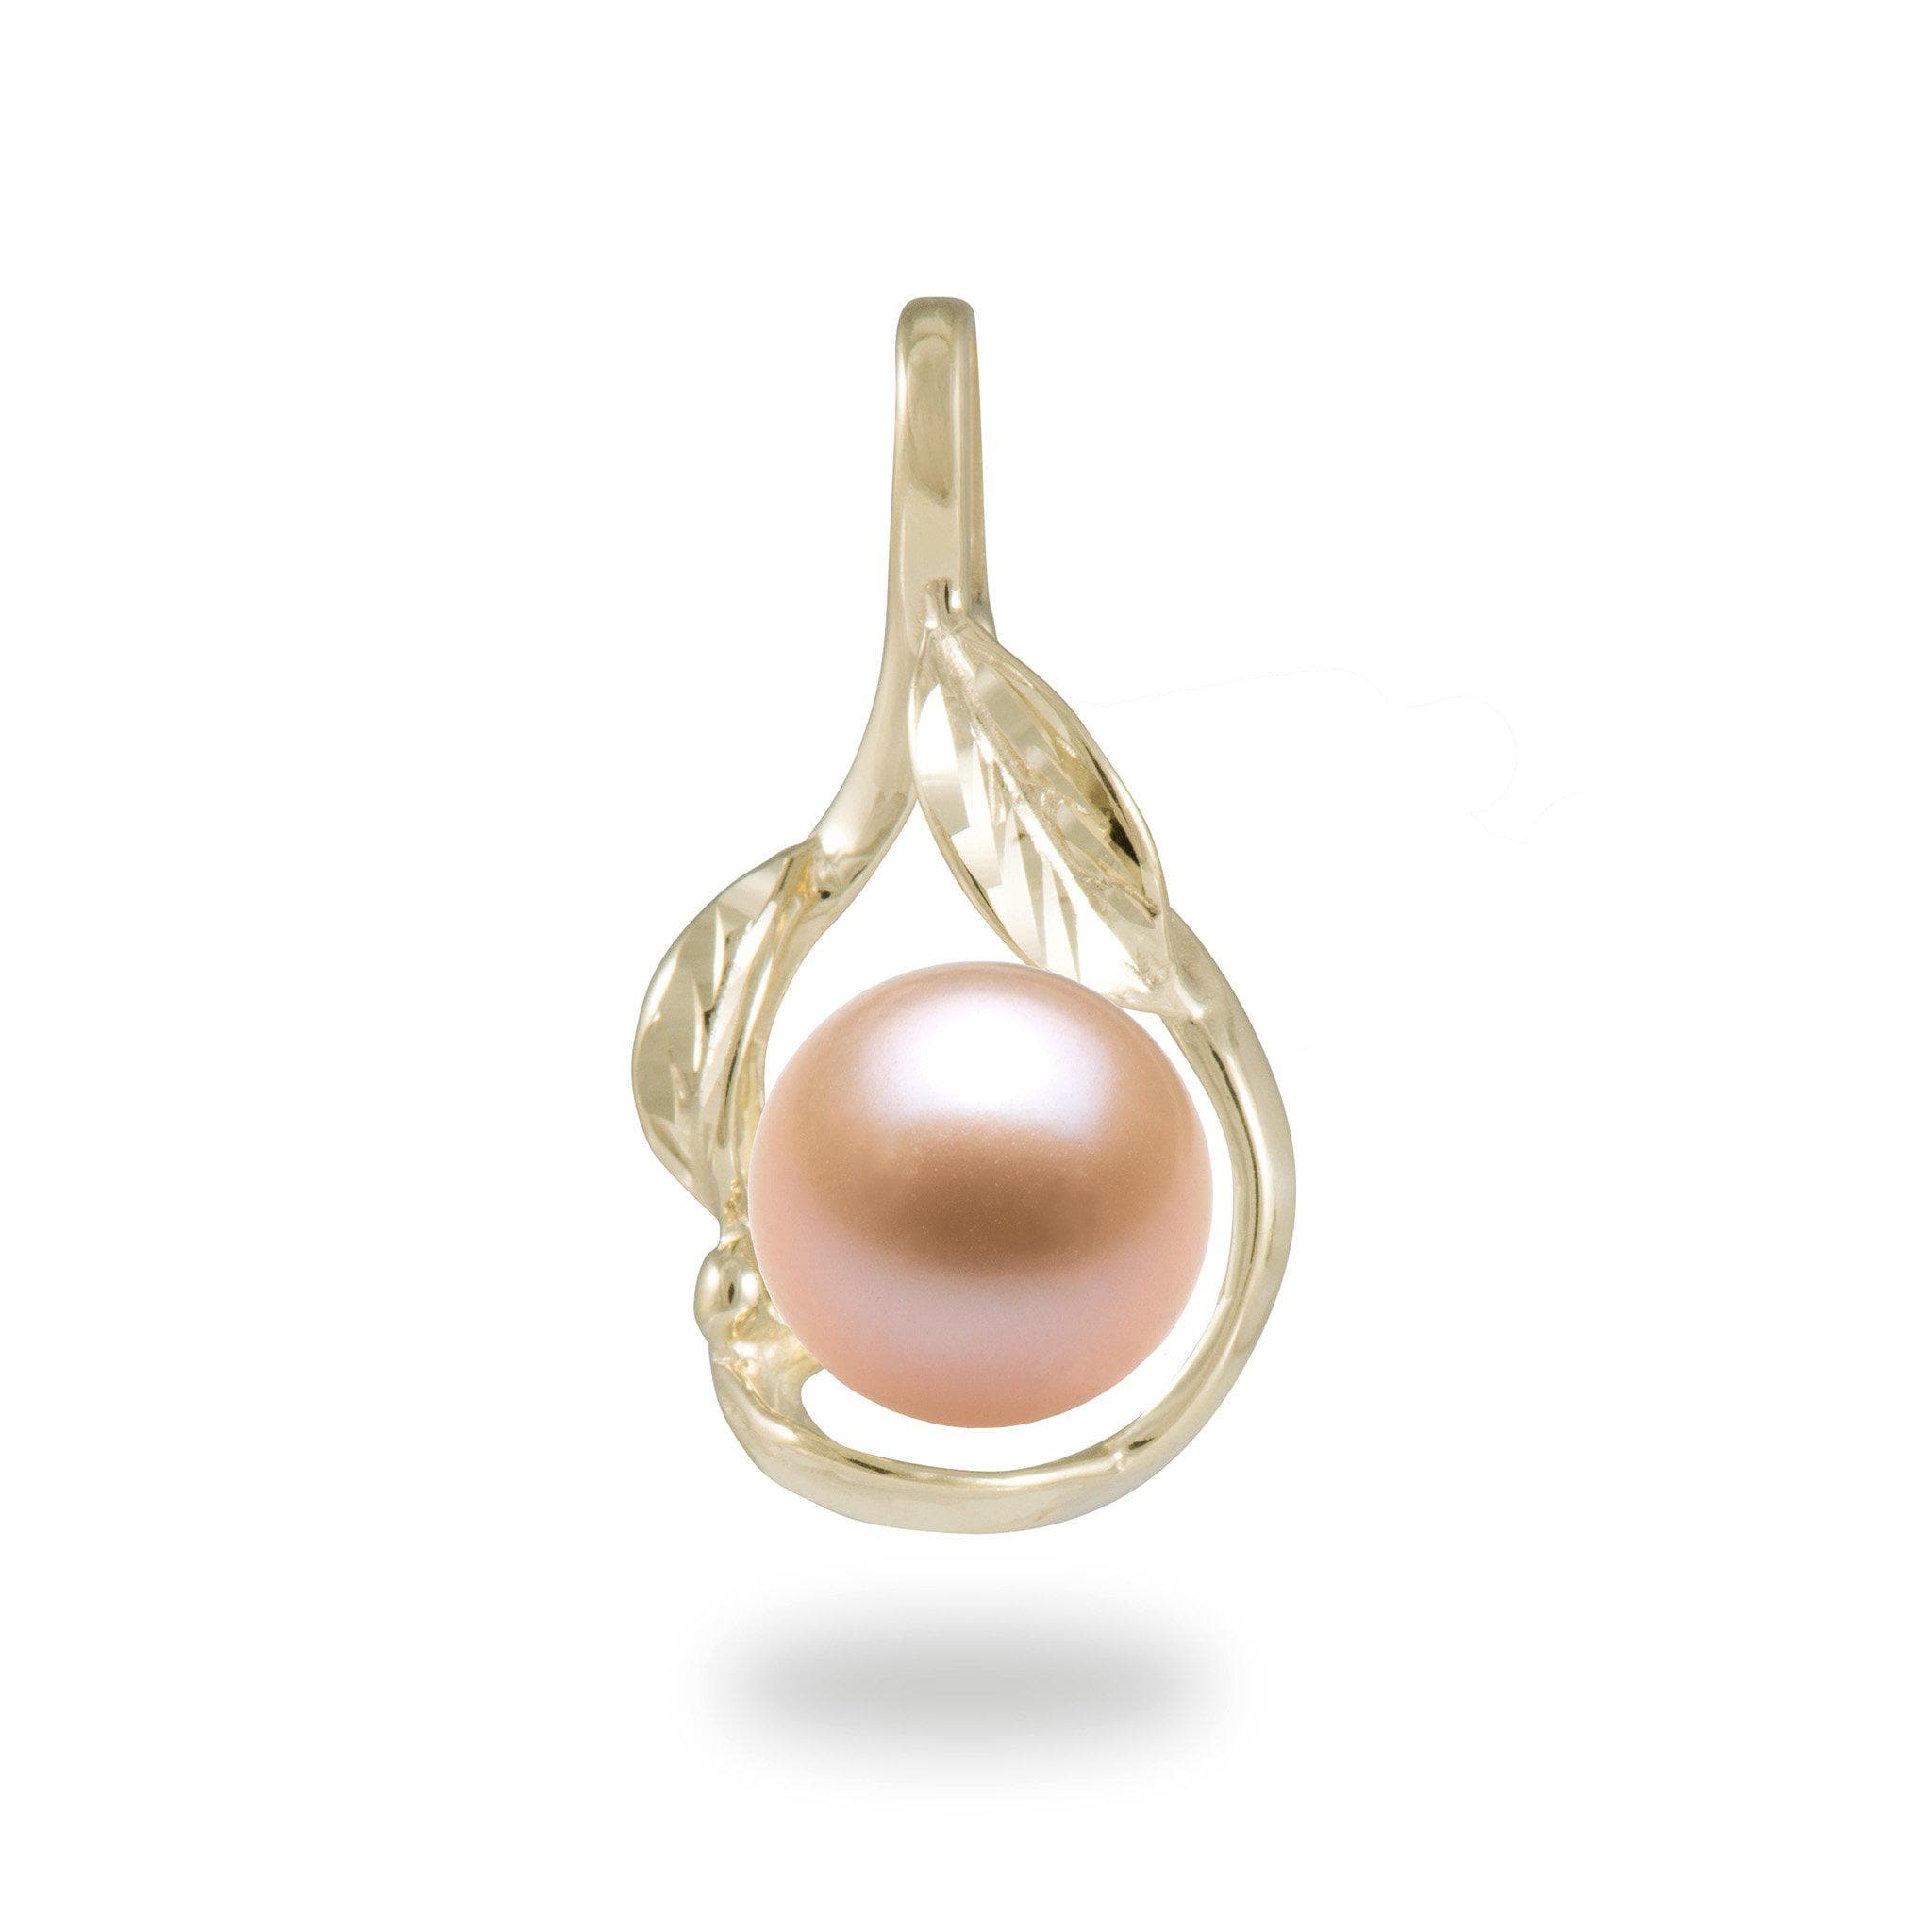 Maile Scroll Pendant Mounting in 14K Yellow Gold with Pink Pearl - Maui Divers Jewelry